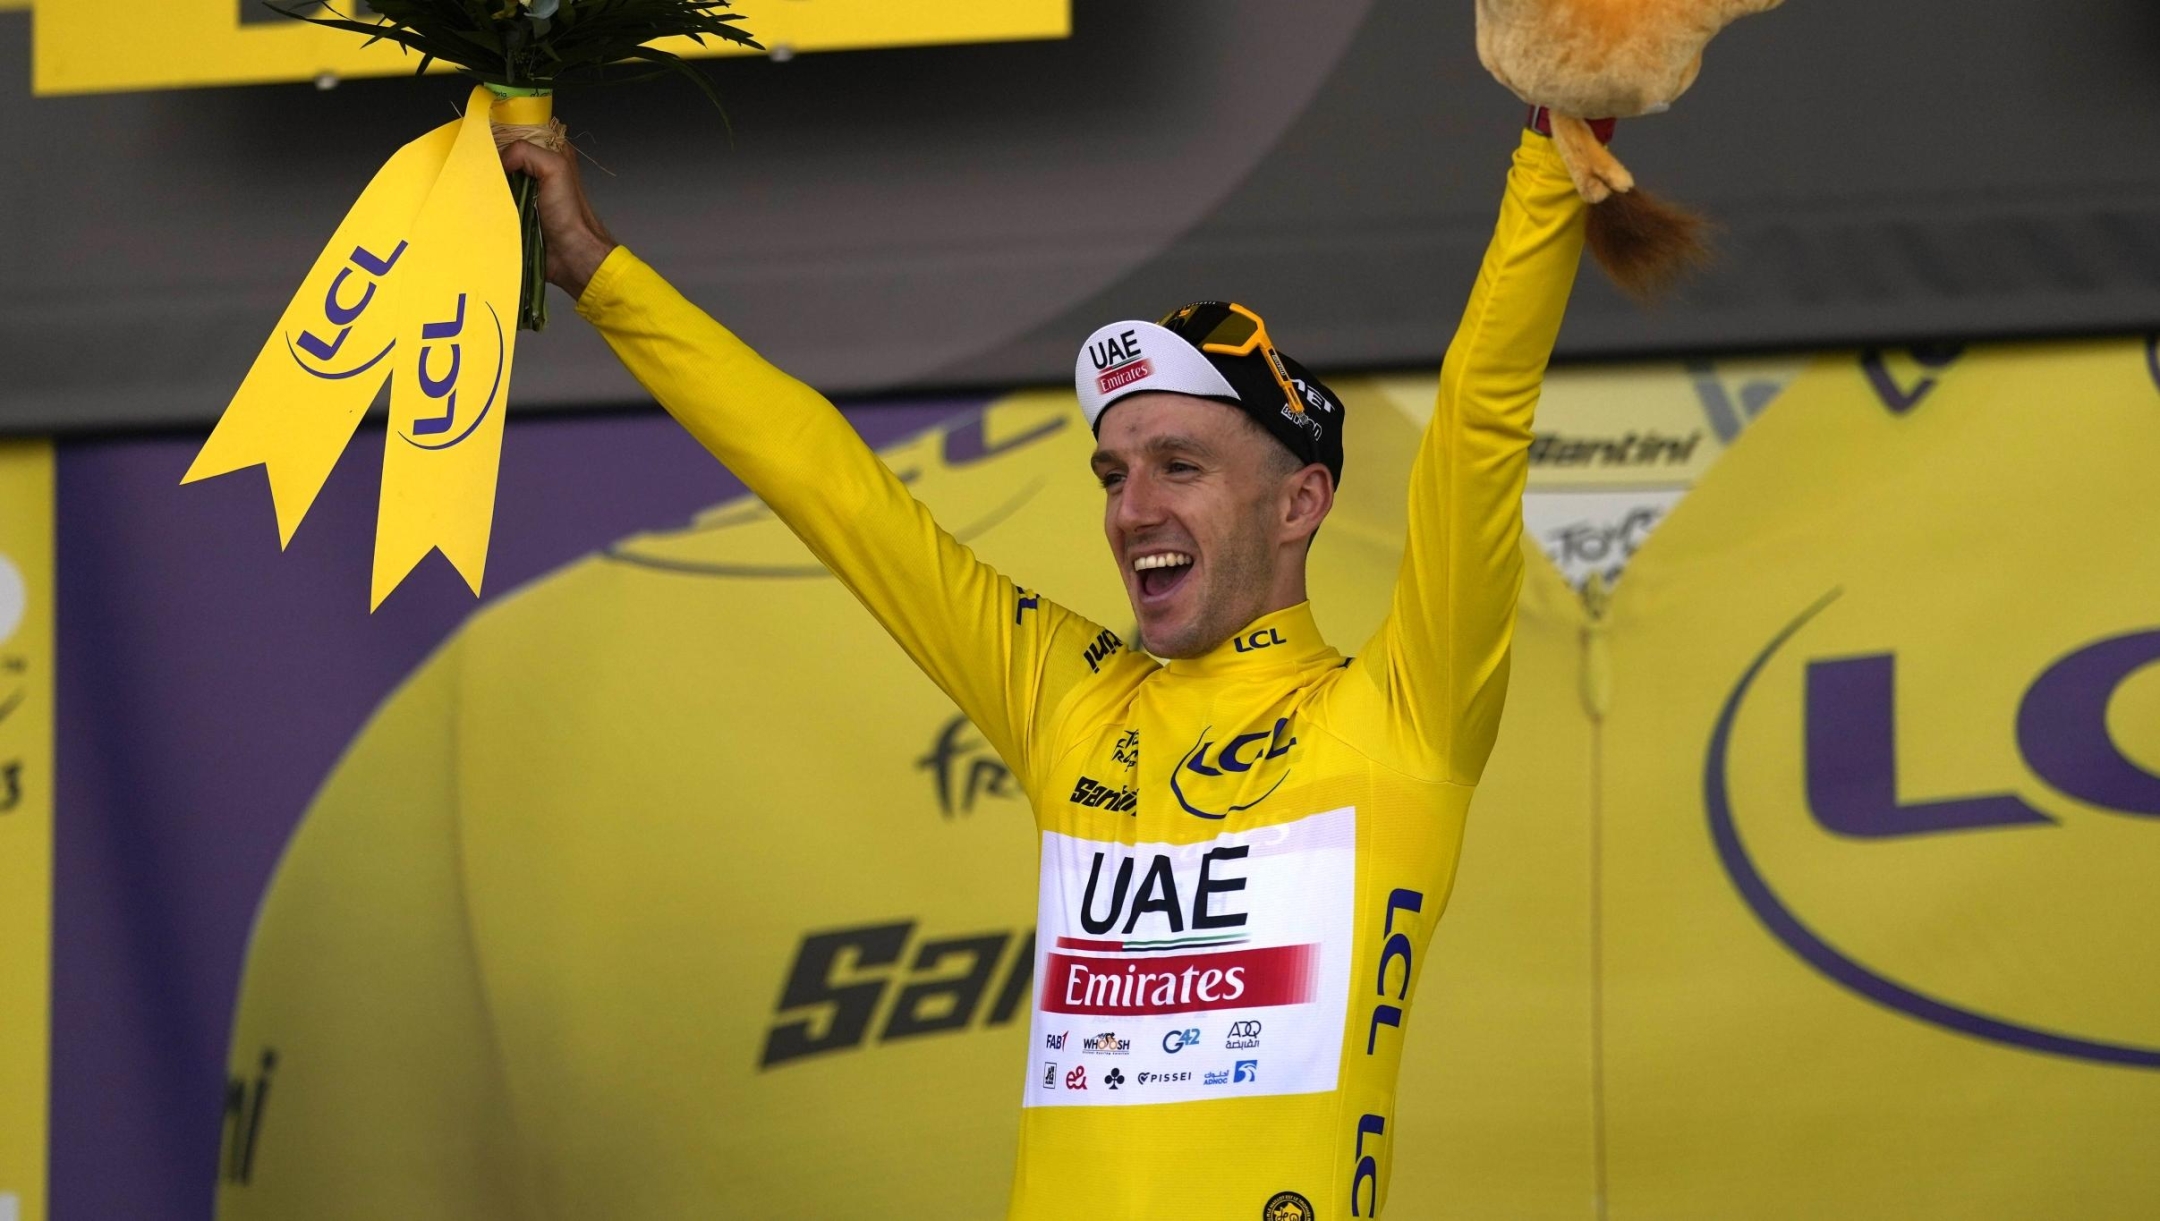 Britain's Adam Yates wearing the overall leader's yellow jersey, celebrates on the podium of the first stage of the Tour de France cycling race over 182 kilometers (113 miles) with start and finish in Bilbao, Spain, Saturday, July 1, 2023. (AP Photo/Thibault Camus)